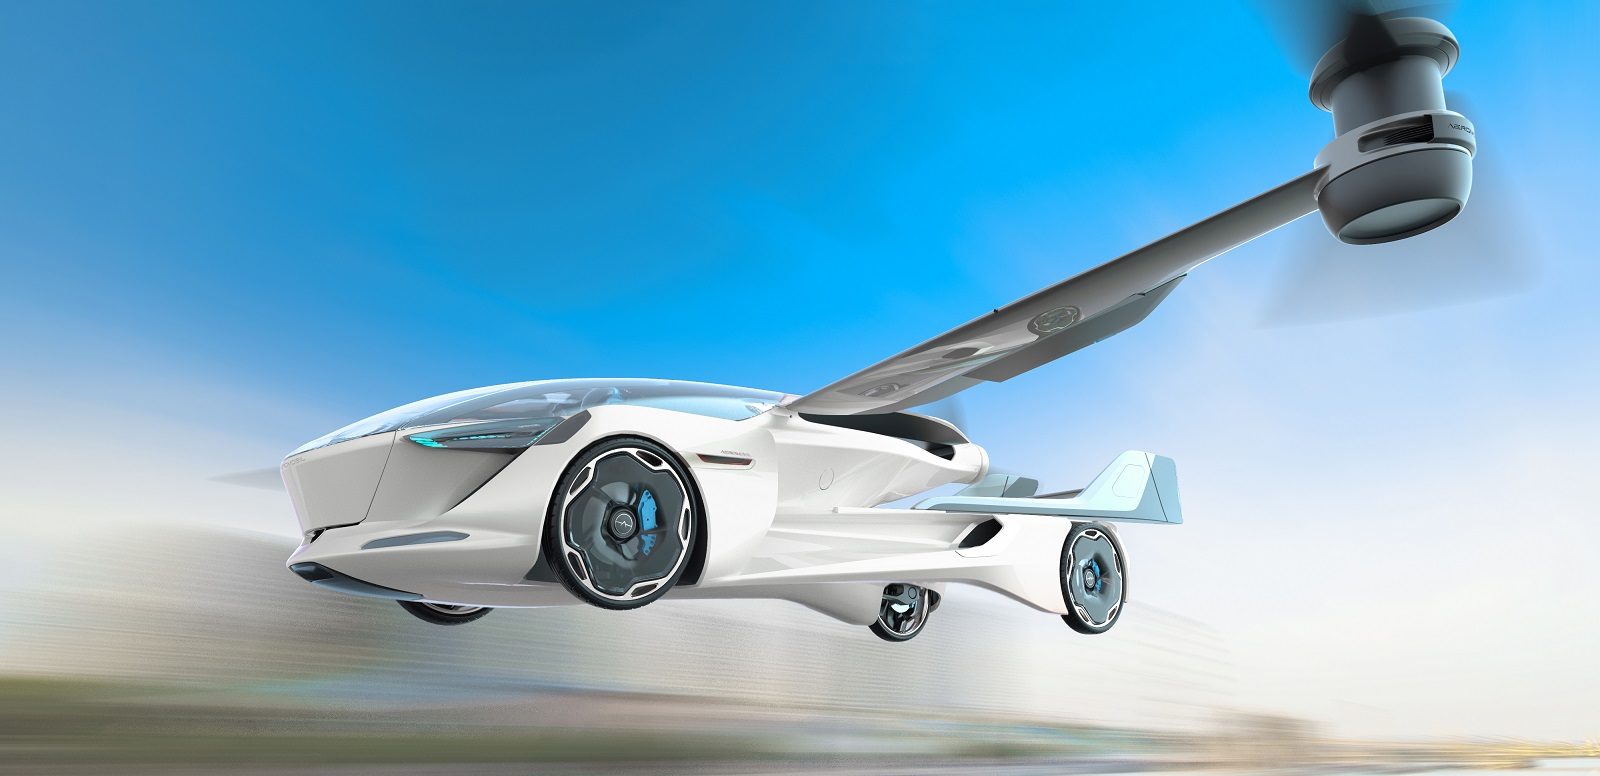 Air Force Pushes Ahead On ‘Flying Car’ Challenge